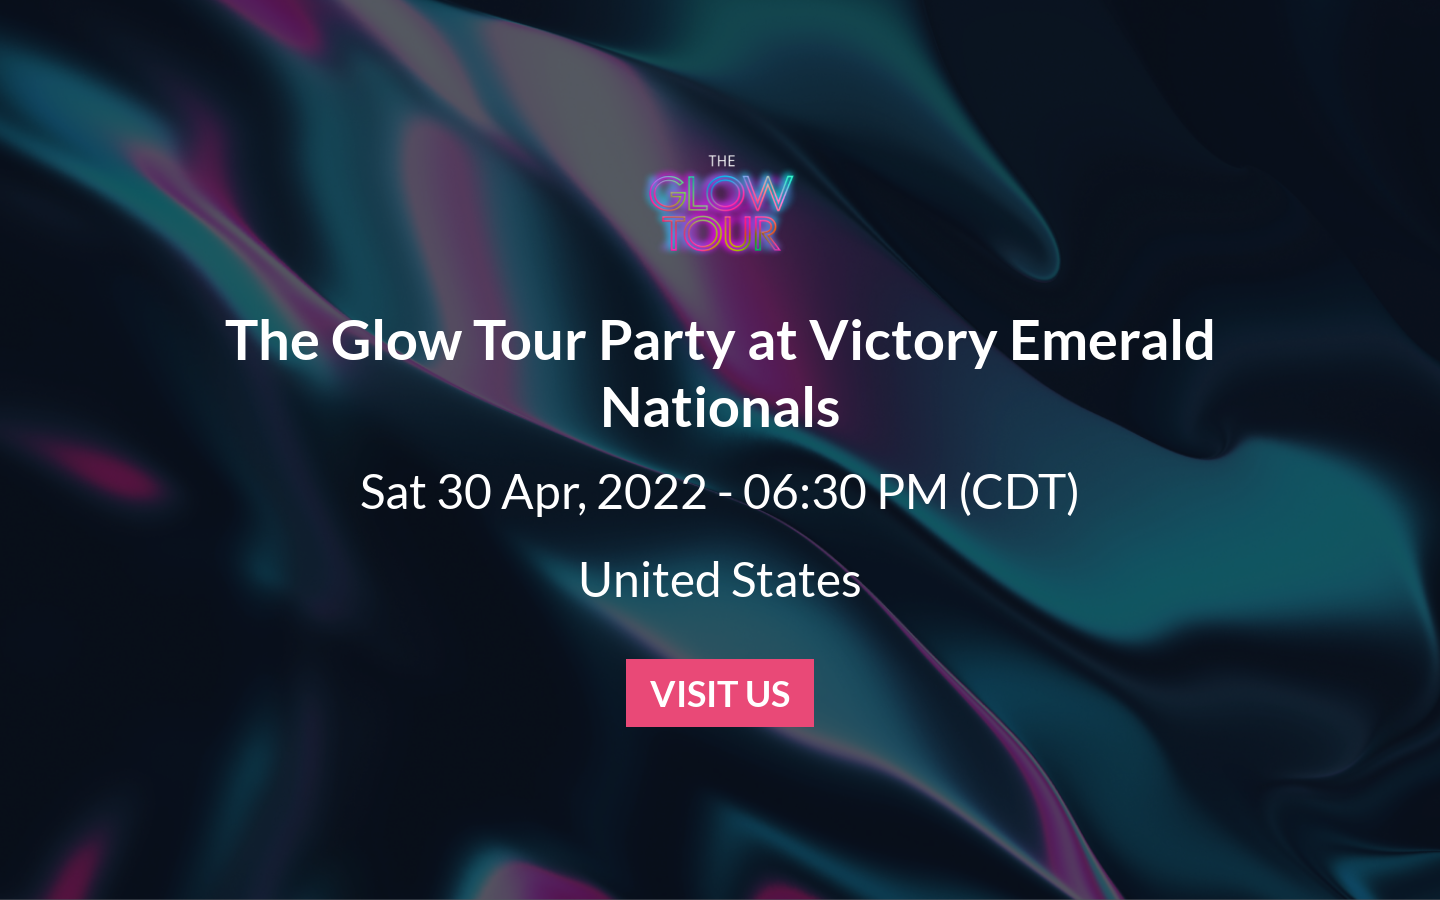 The Glow Tour Party at Victory Emerald Nationals